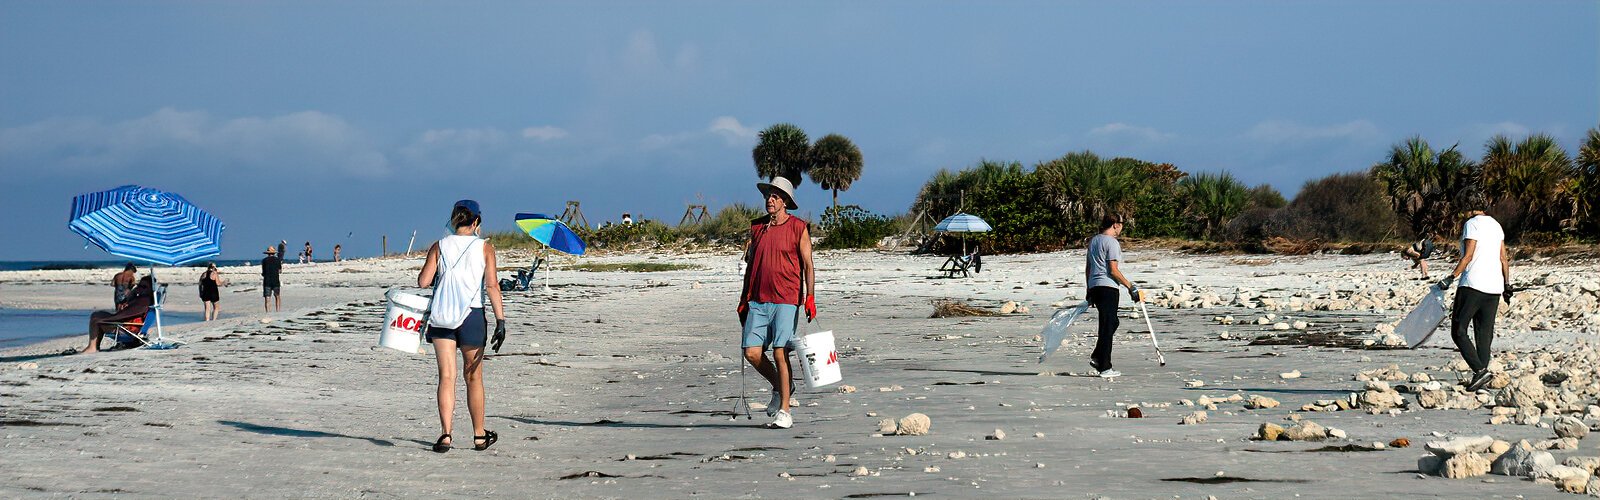 Honeymoon Island State Park coordinated a beach cleanup for International Coastal Cleanup Day, an annual event spearheaded by the Ocean Conservancy that takes place on the third Saturday of September in over 100 countries.